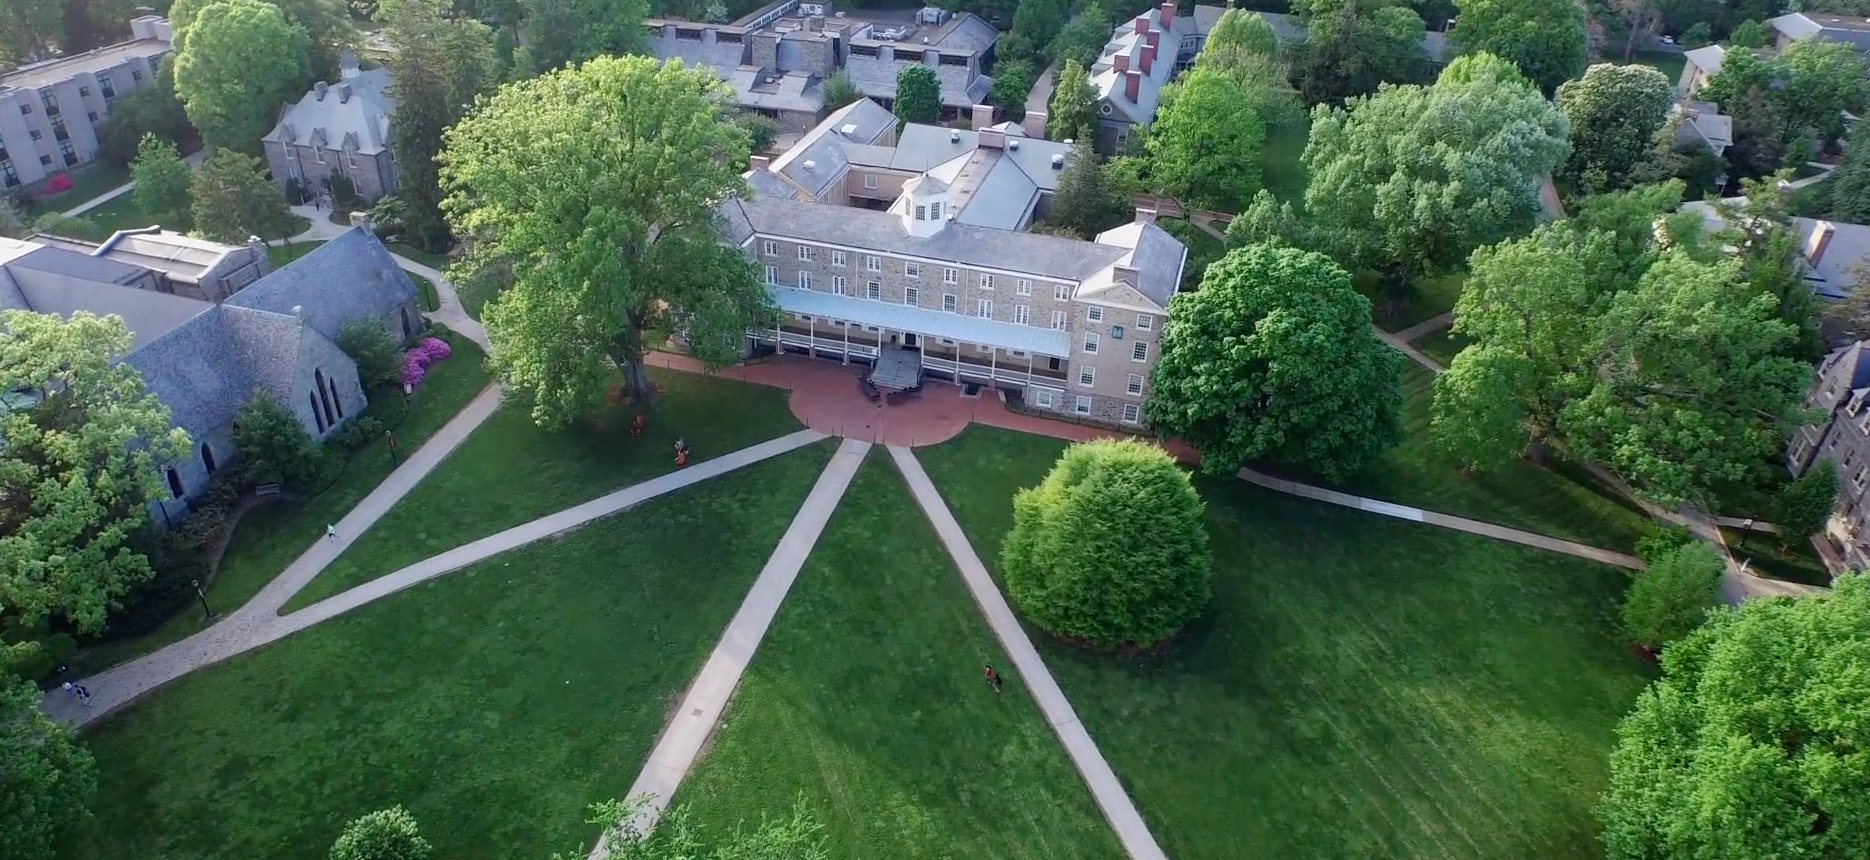 Ariel shot of Founders Hall